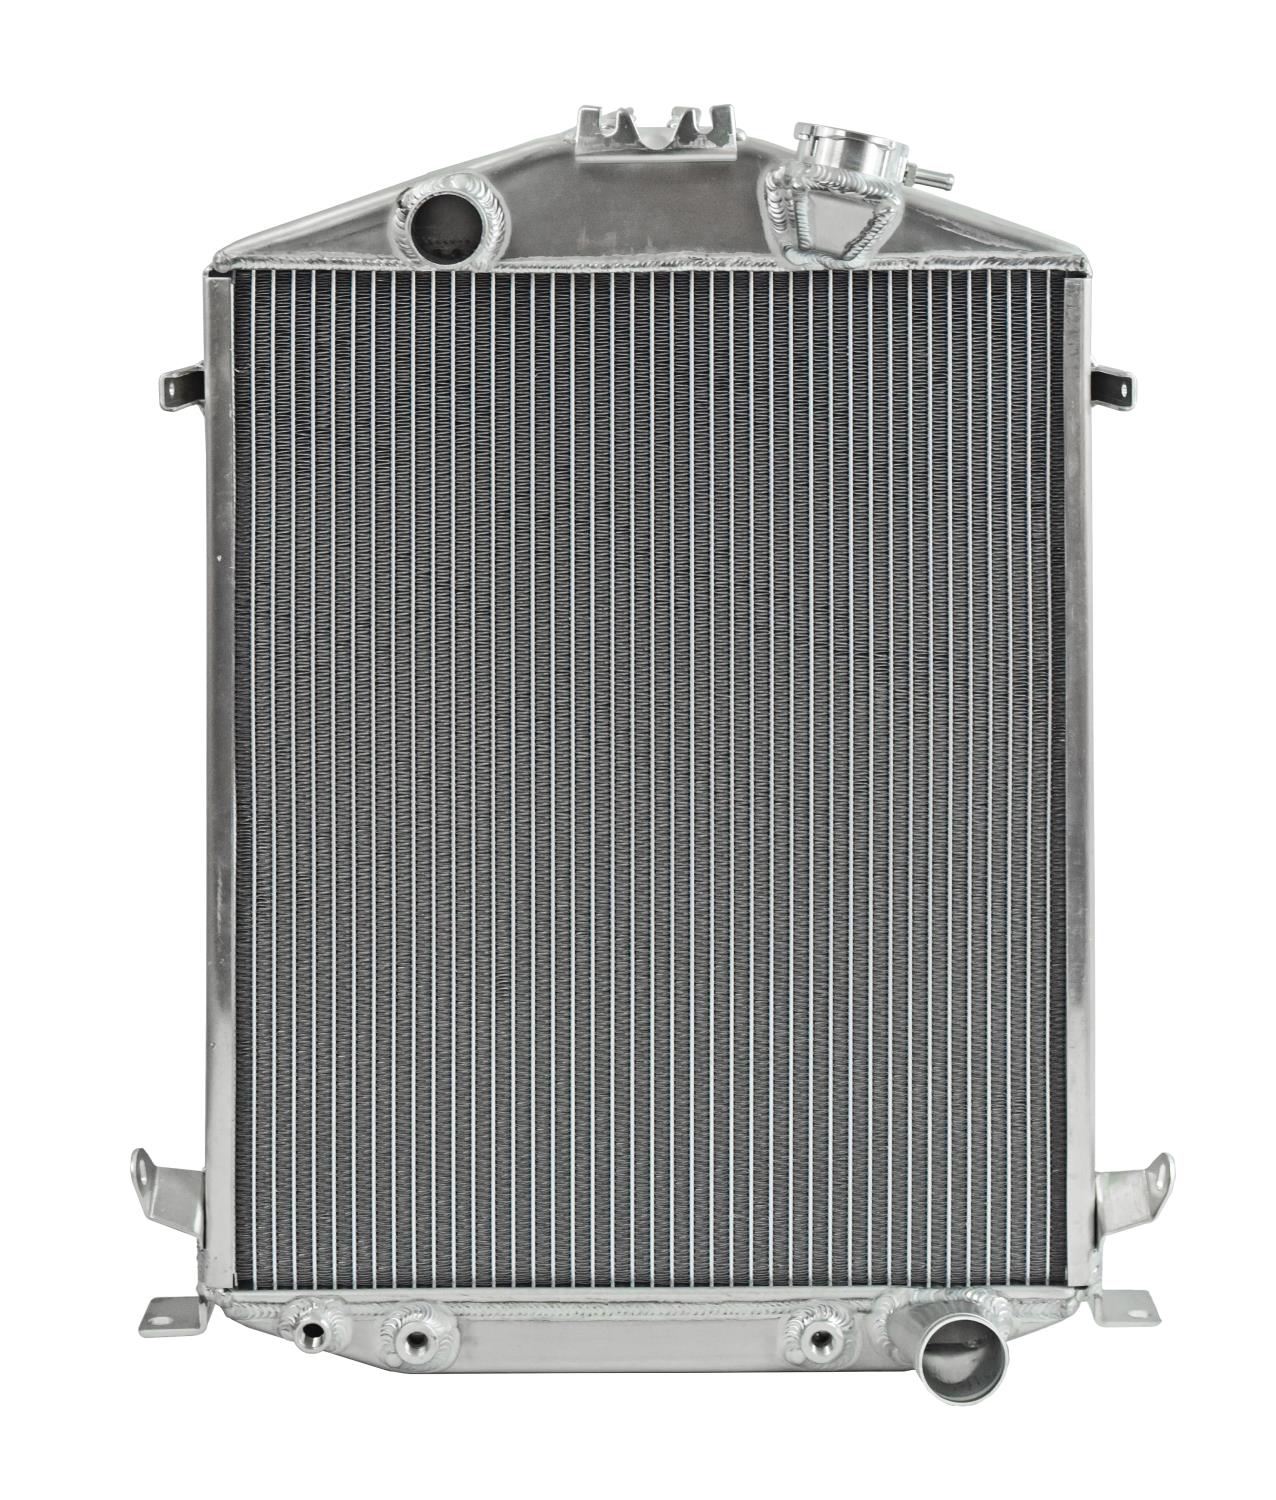 Aluminum Radiator for 1928-1931 Ford Model A with Chevy V8 Engine & Full-Height Grill